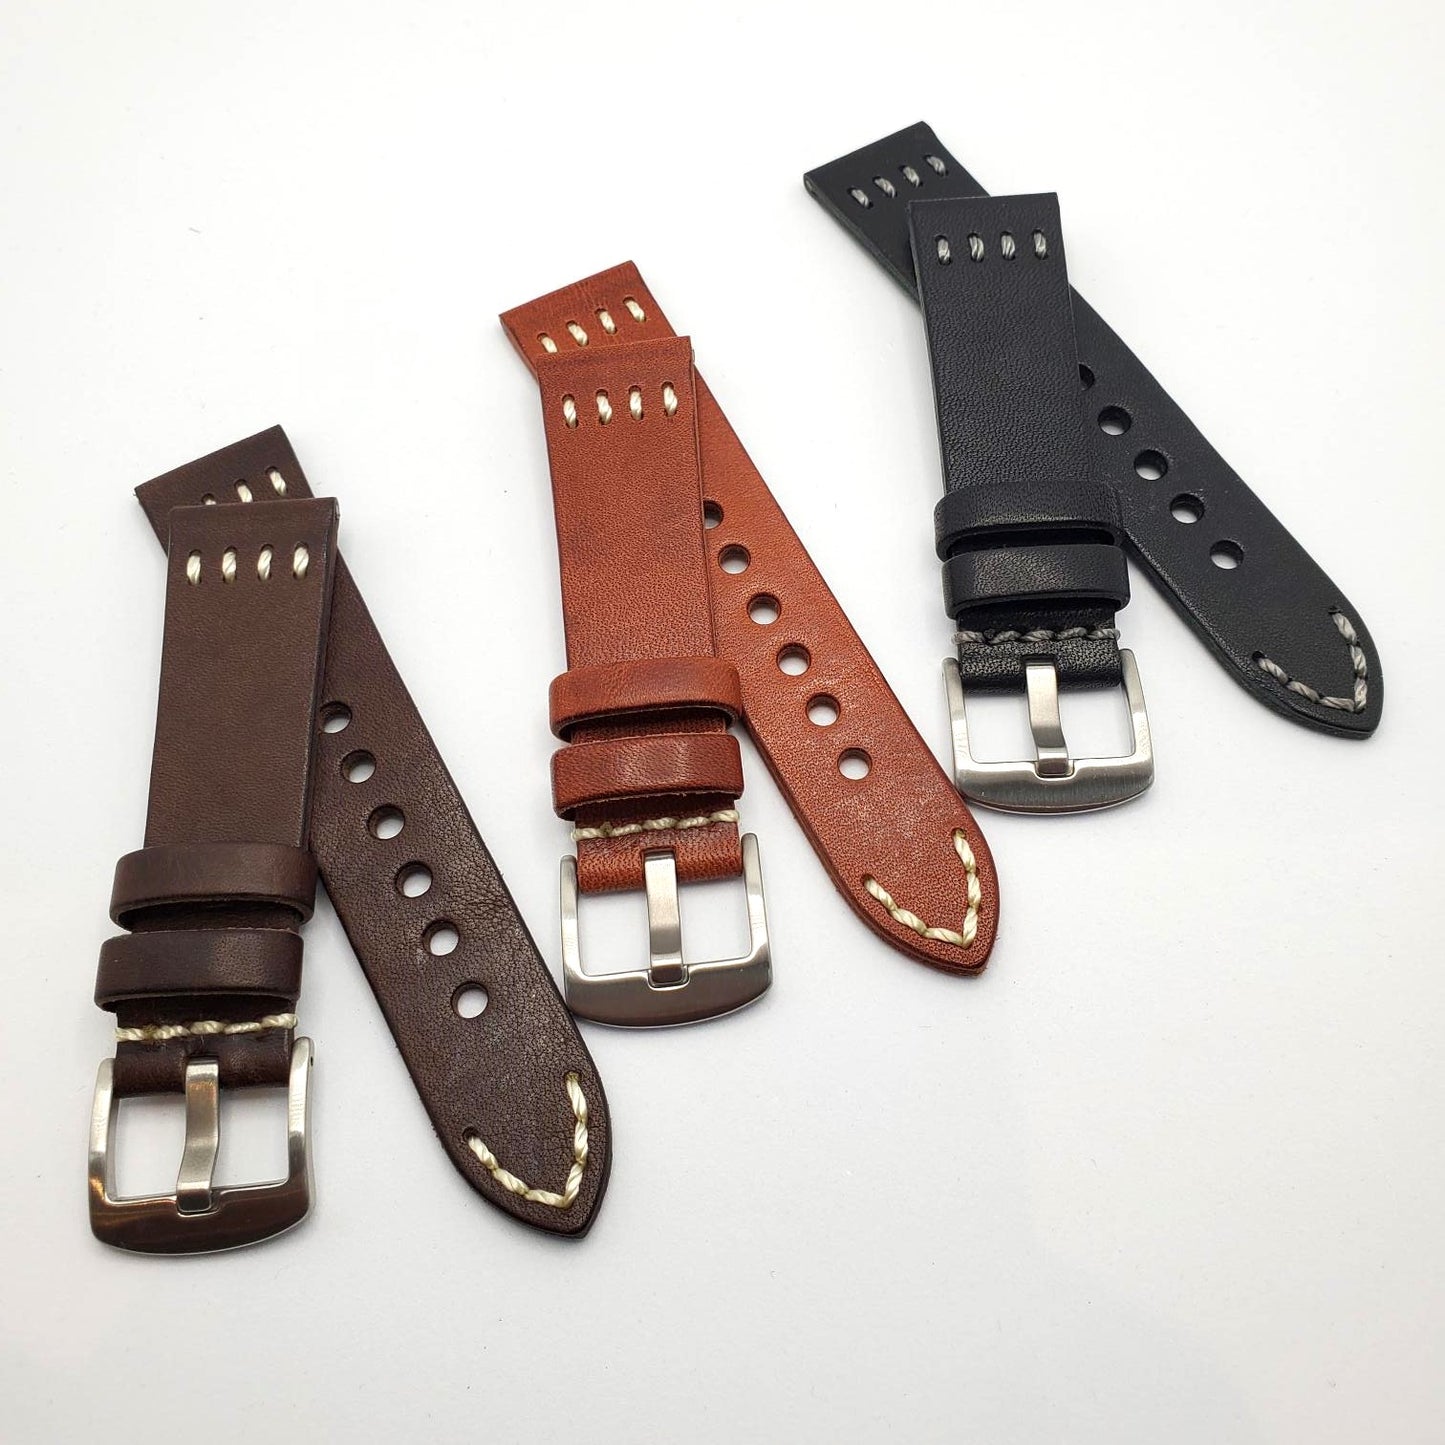 Vintage Leather Strap with Steel Buckle (avail. Black, Brown, Light Brown)